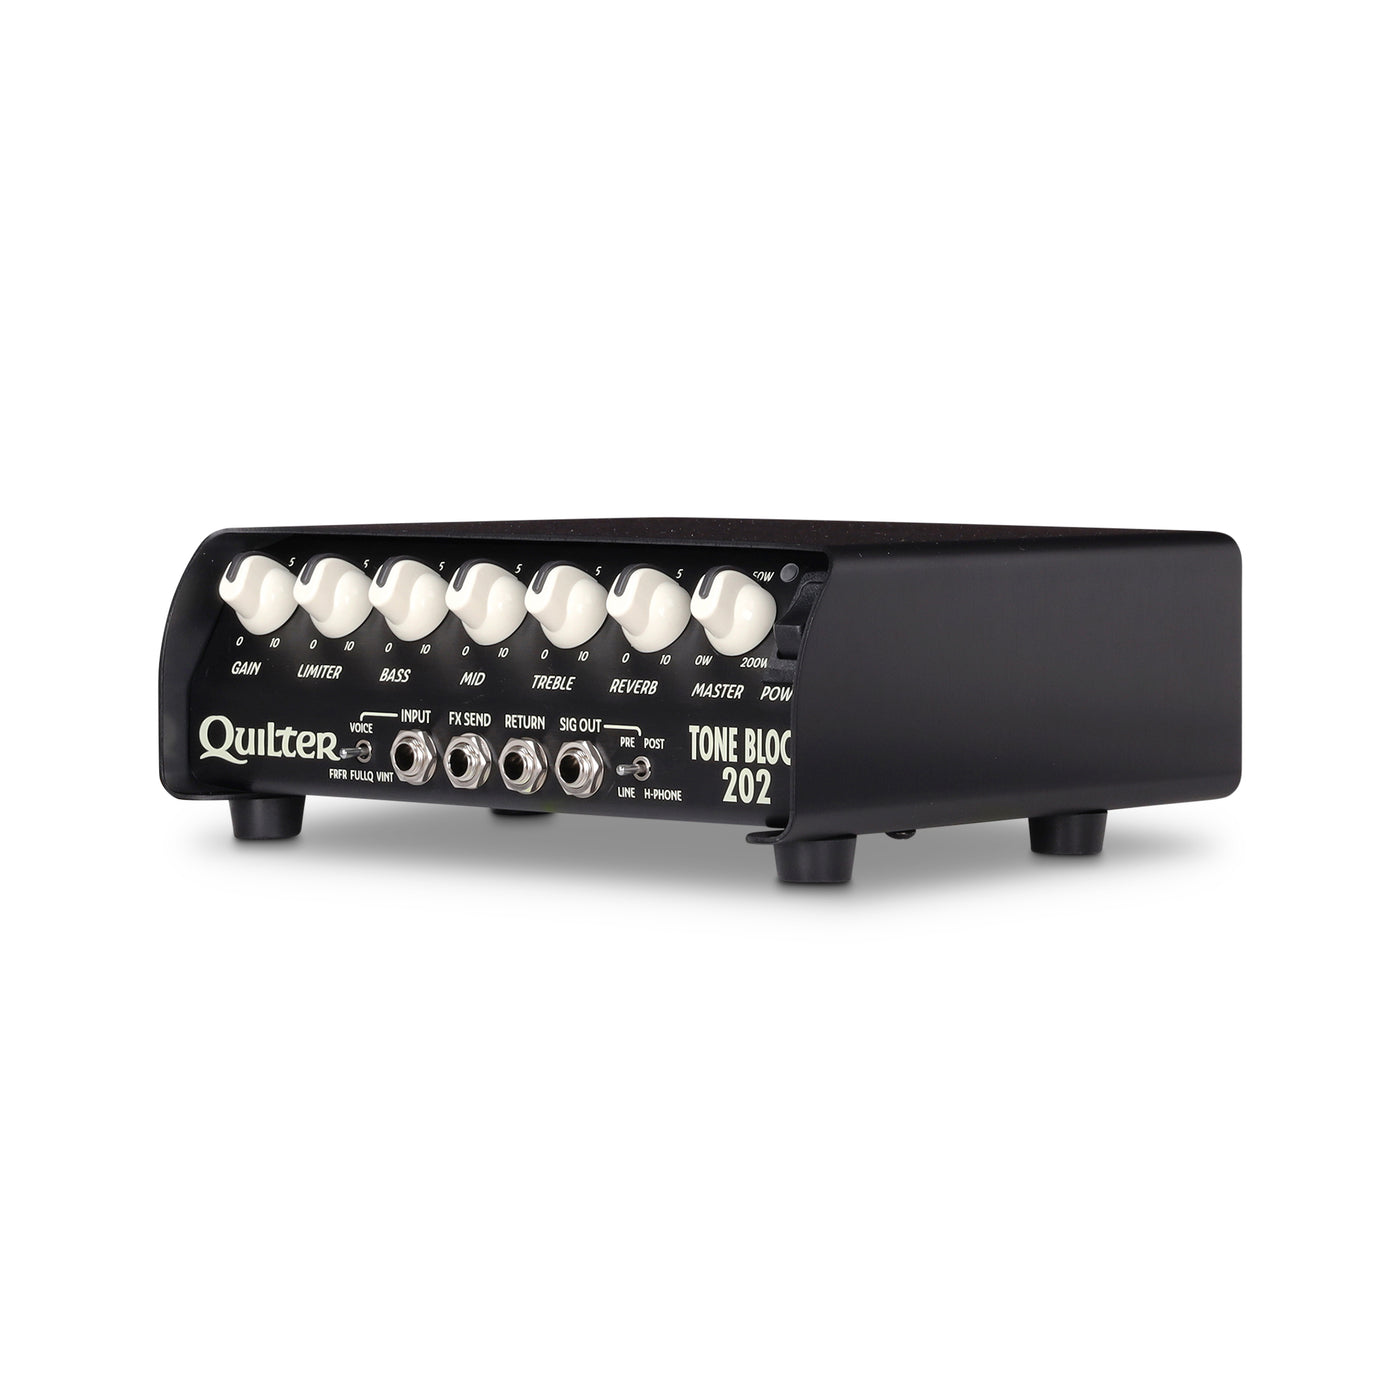 Quilter Labs Tone Block 202 Guitar Amplifier Head facing diagonally to the left